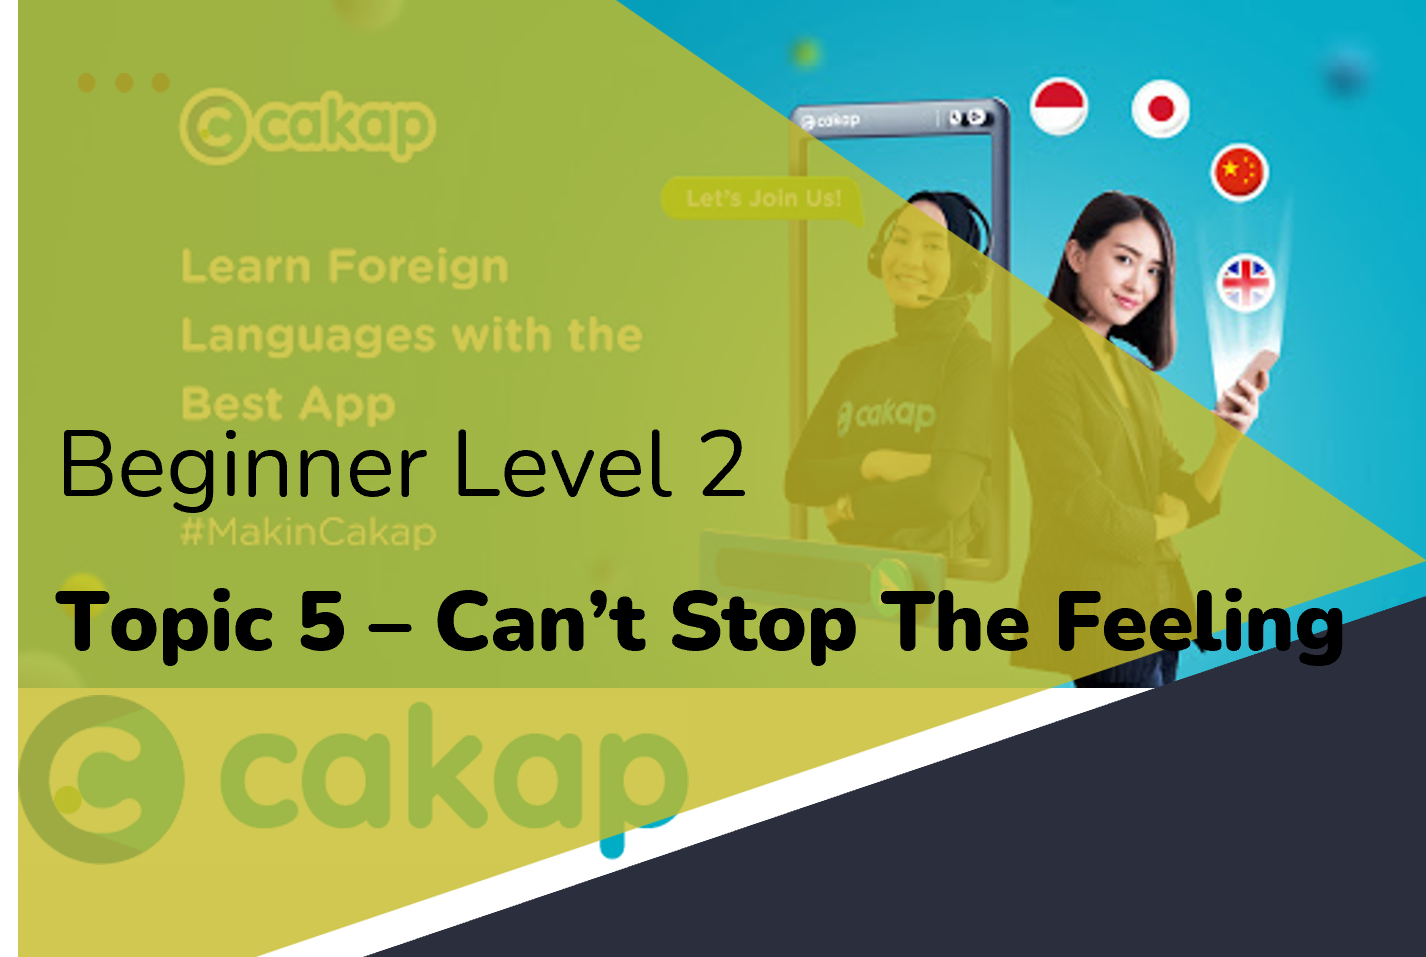 Beginner 2: Topic 5 - Can't Stop The Feeling